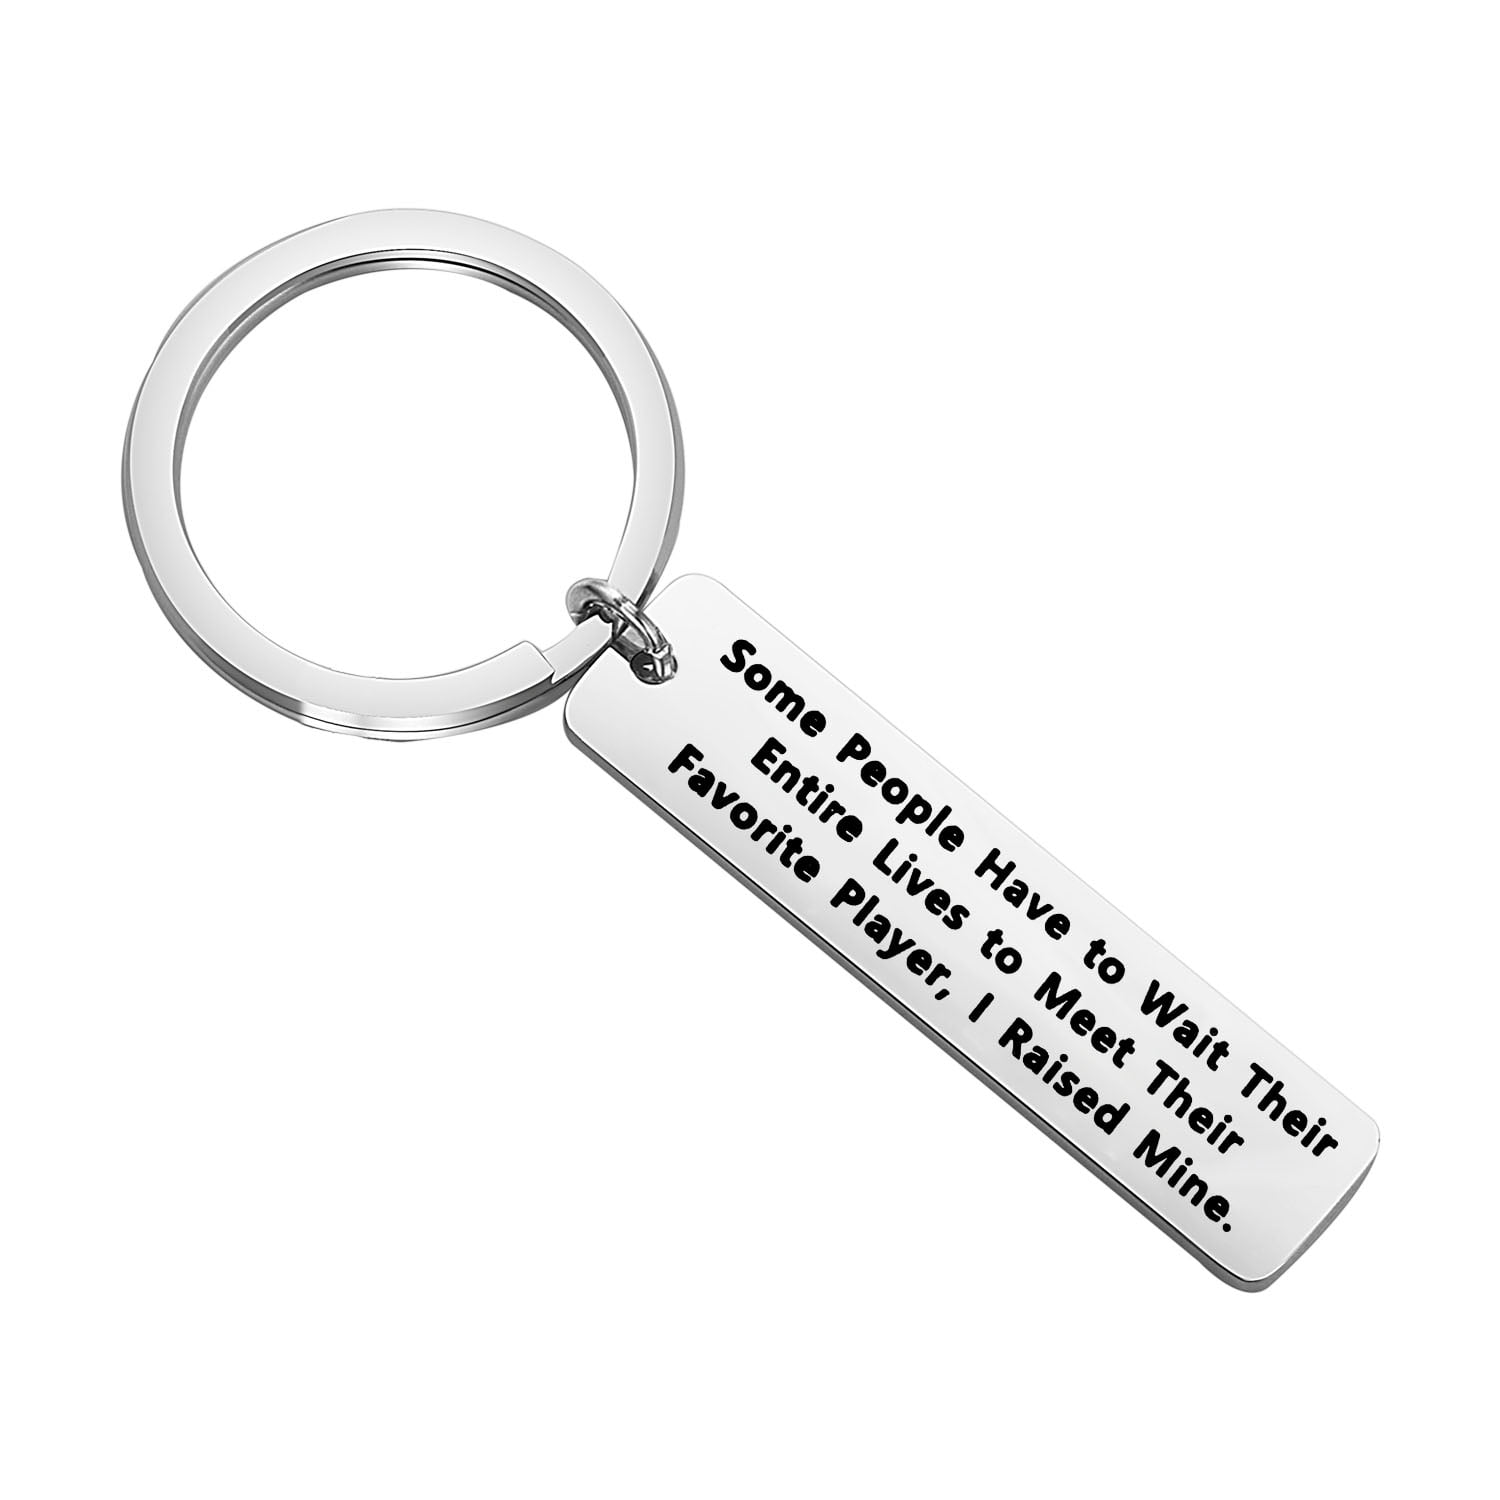 FOOTBALL COACH tutor PERSONALISED soccer,THANK YOU keyring charm gift 